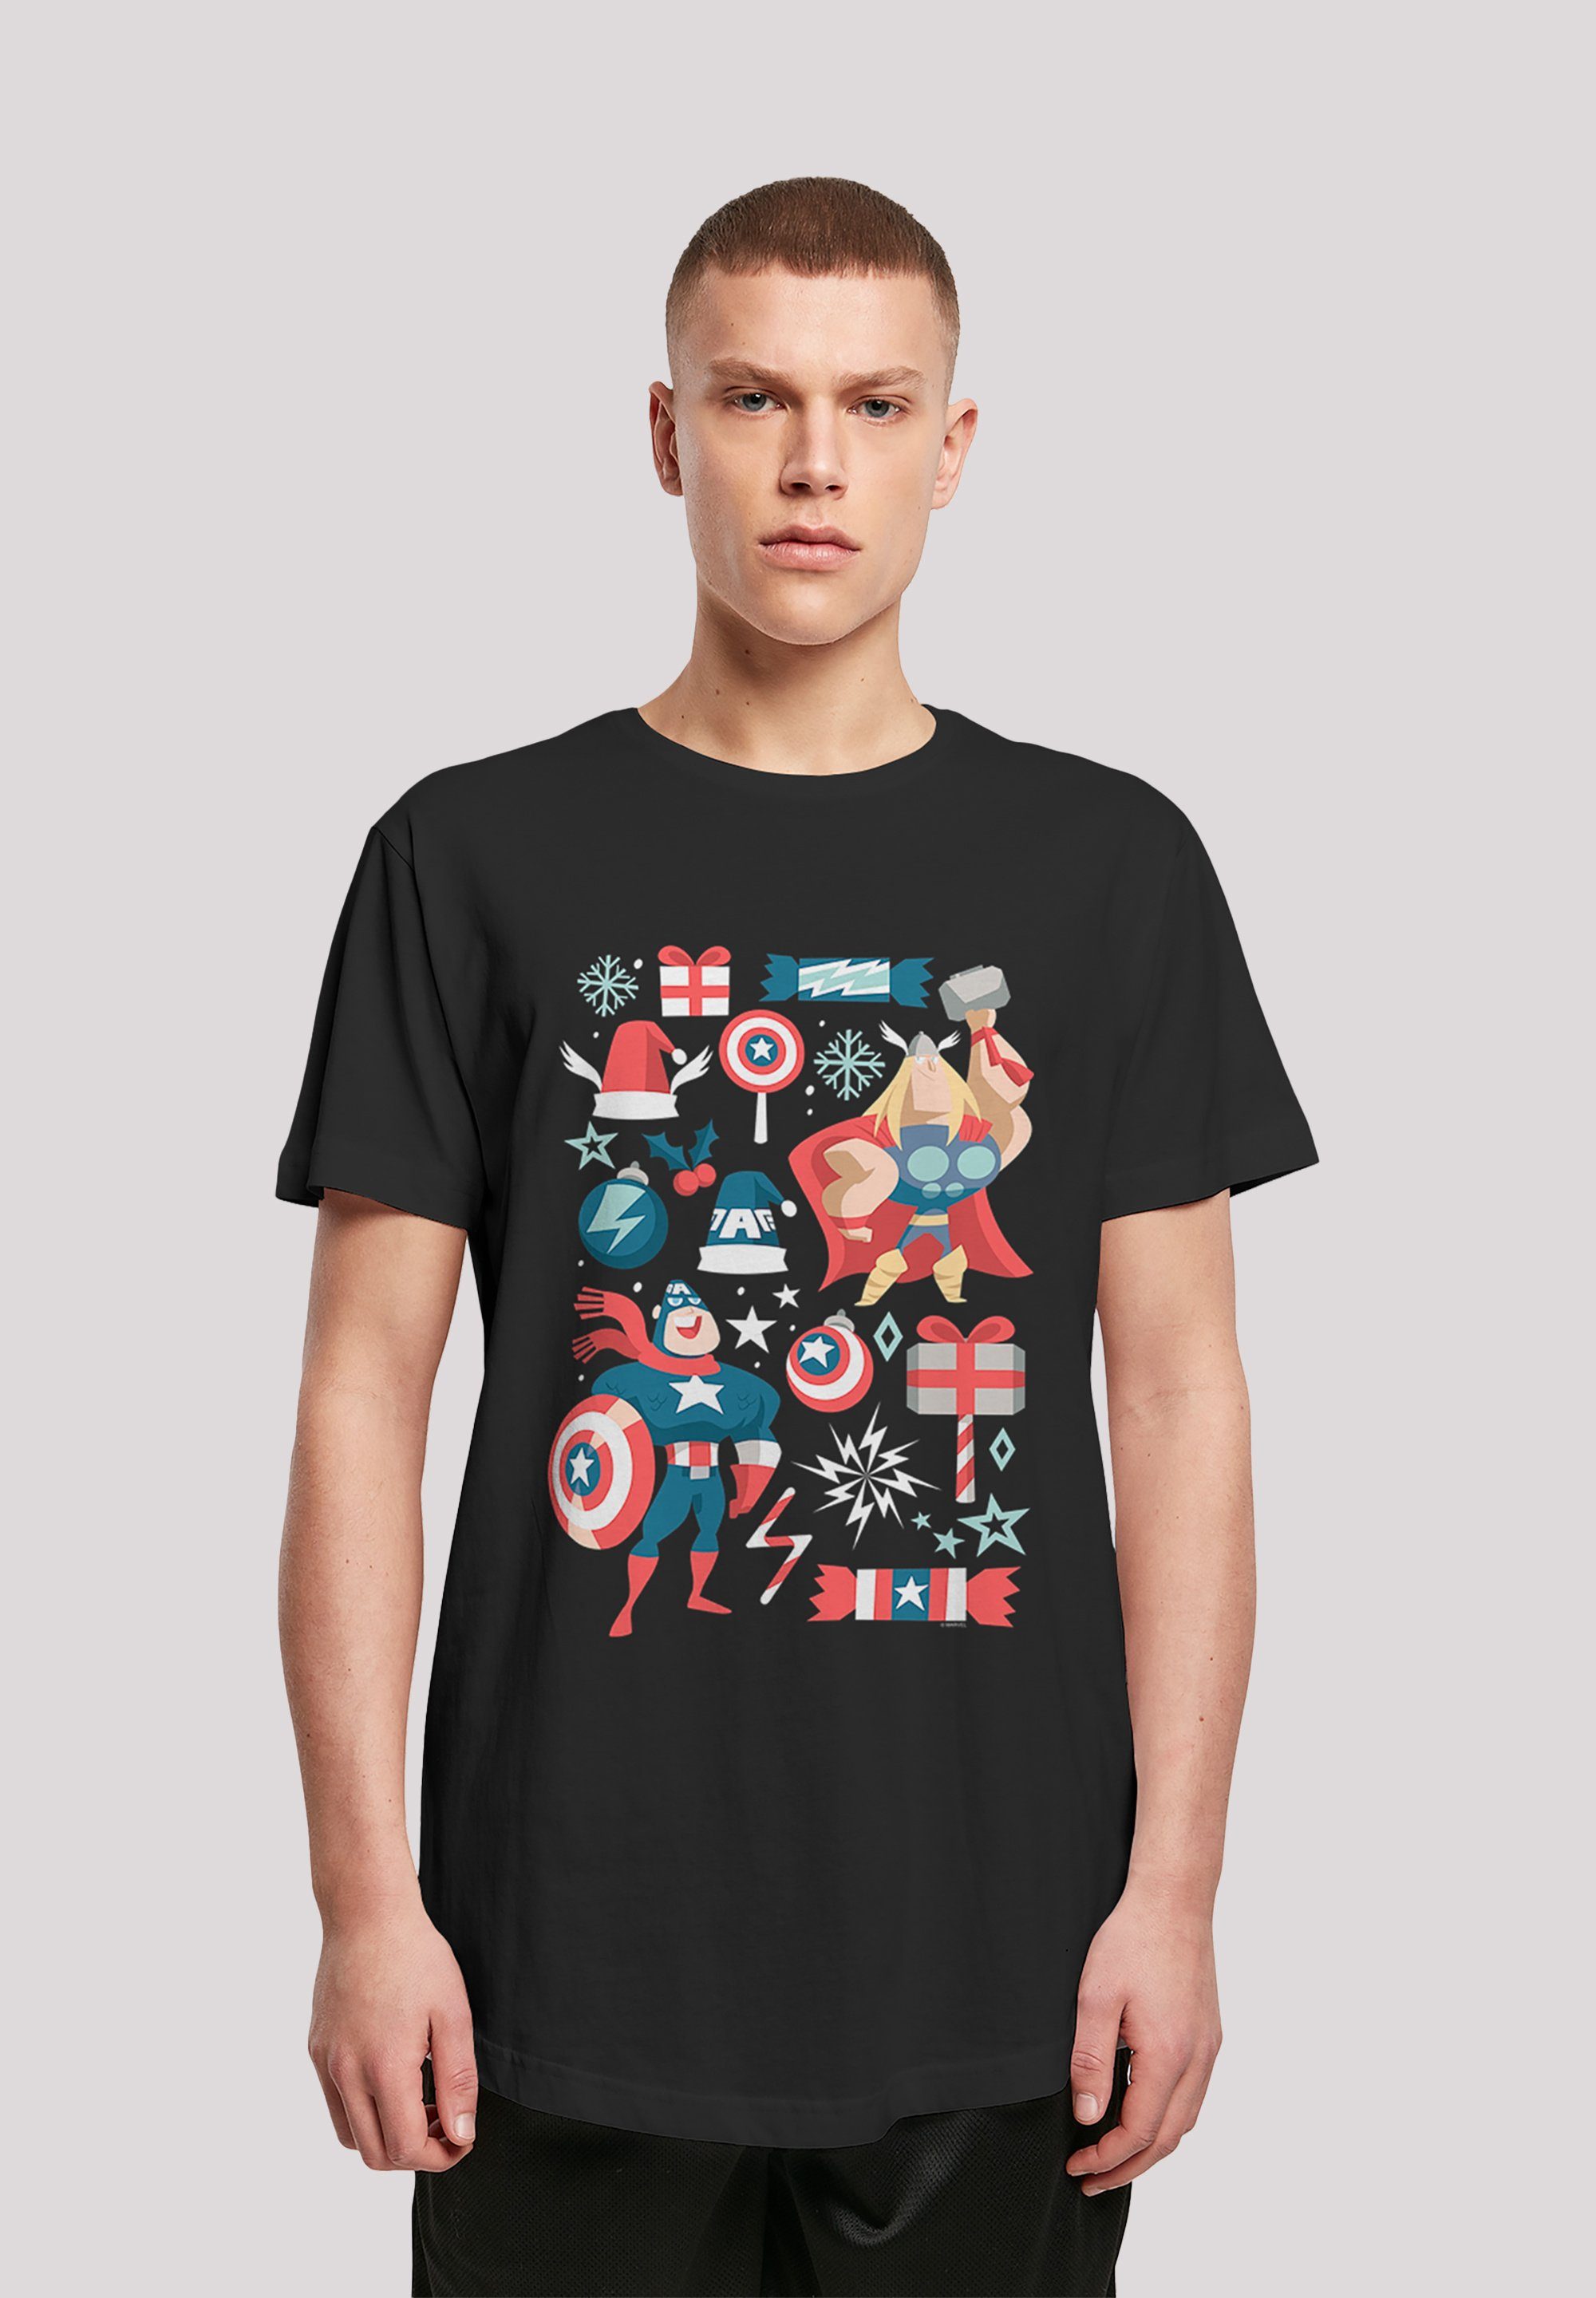 America Print T-Shirt F4NT4STIC Weihnachten Marvel Captain Thor And